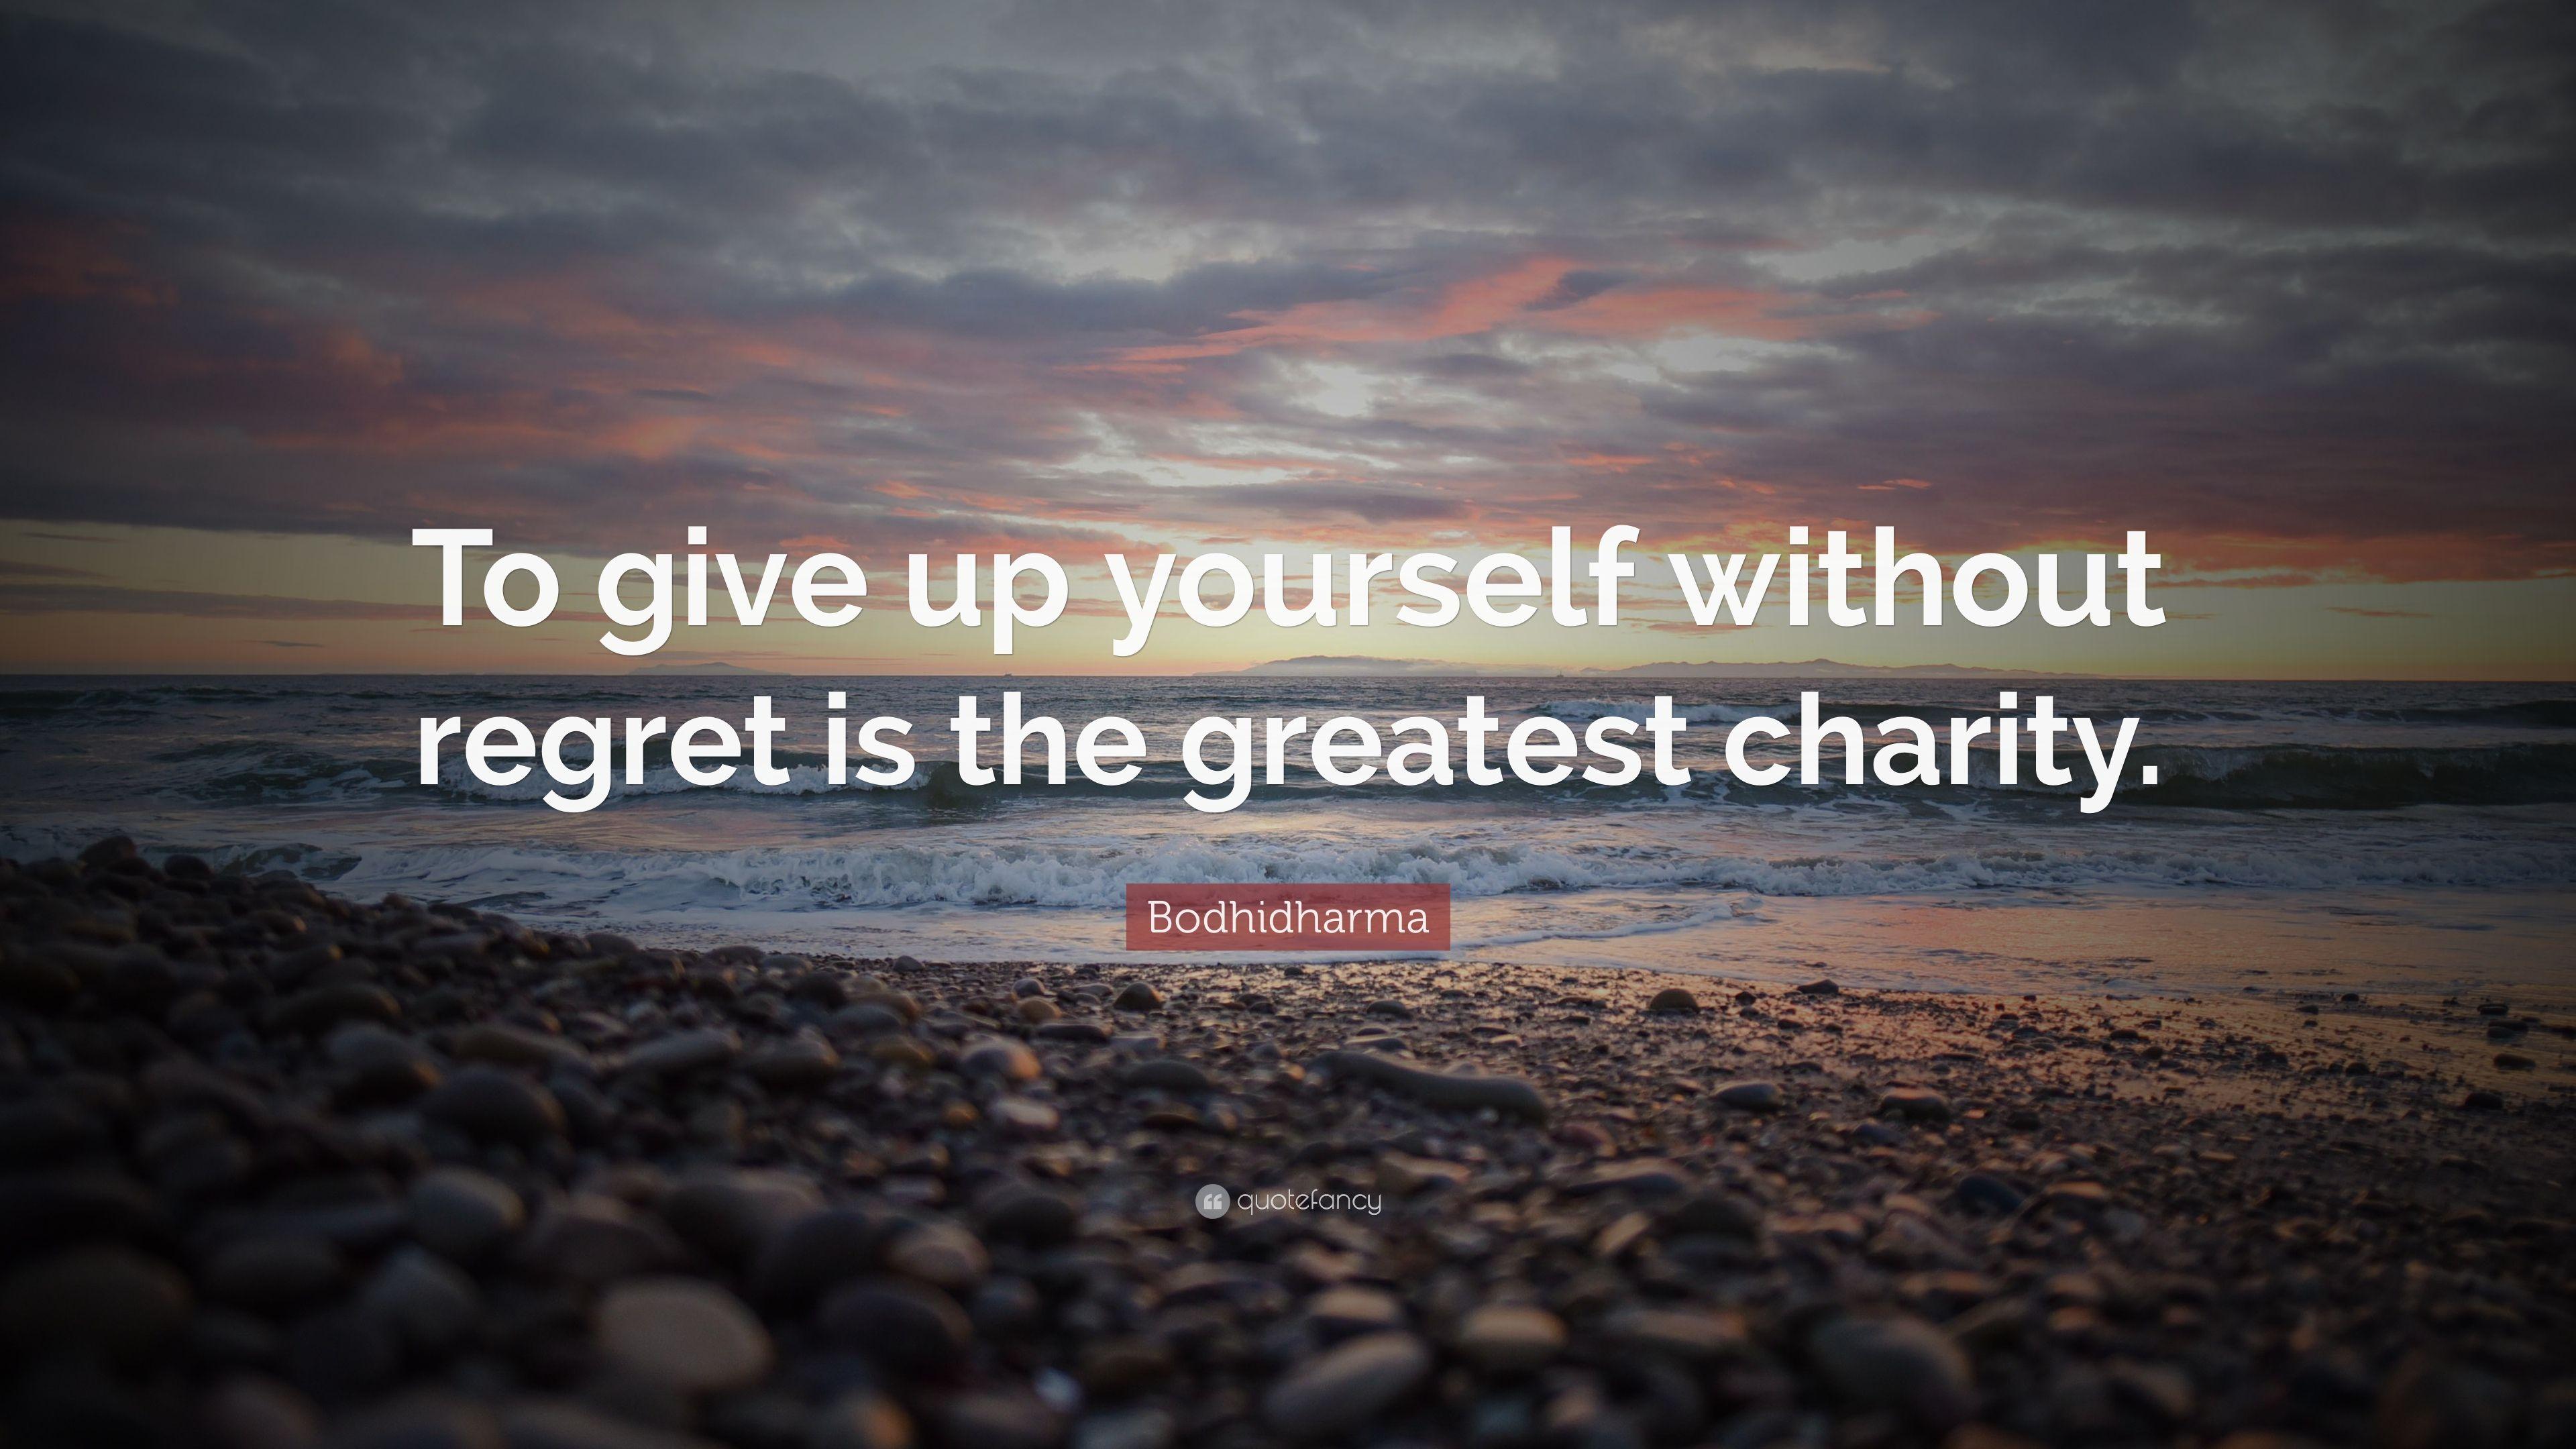 Bodhidharma Quote: “To give up yourself without regret is